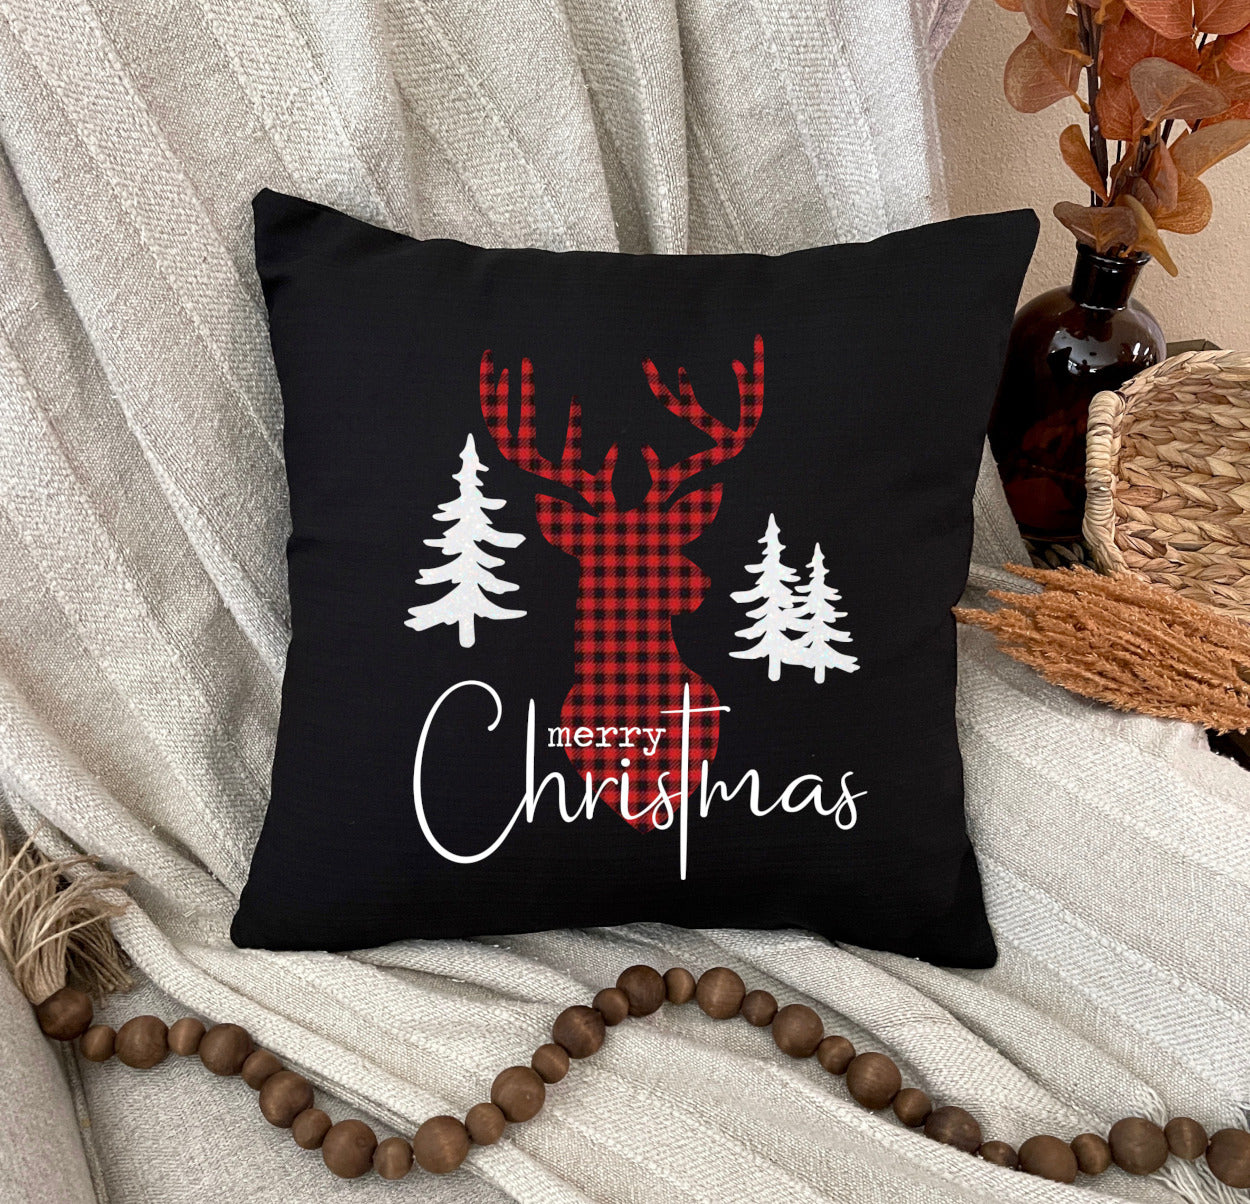 Red Plaid Christmas Pillow Cover